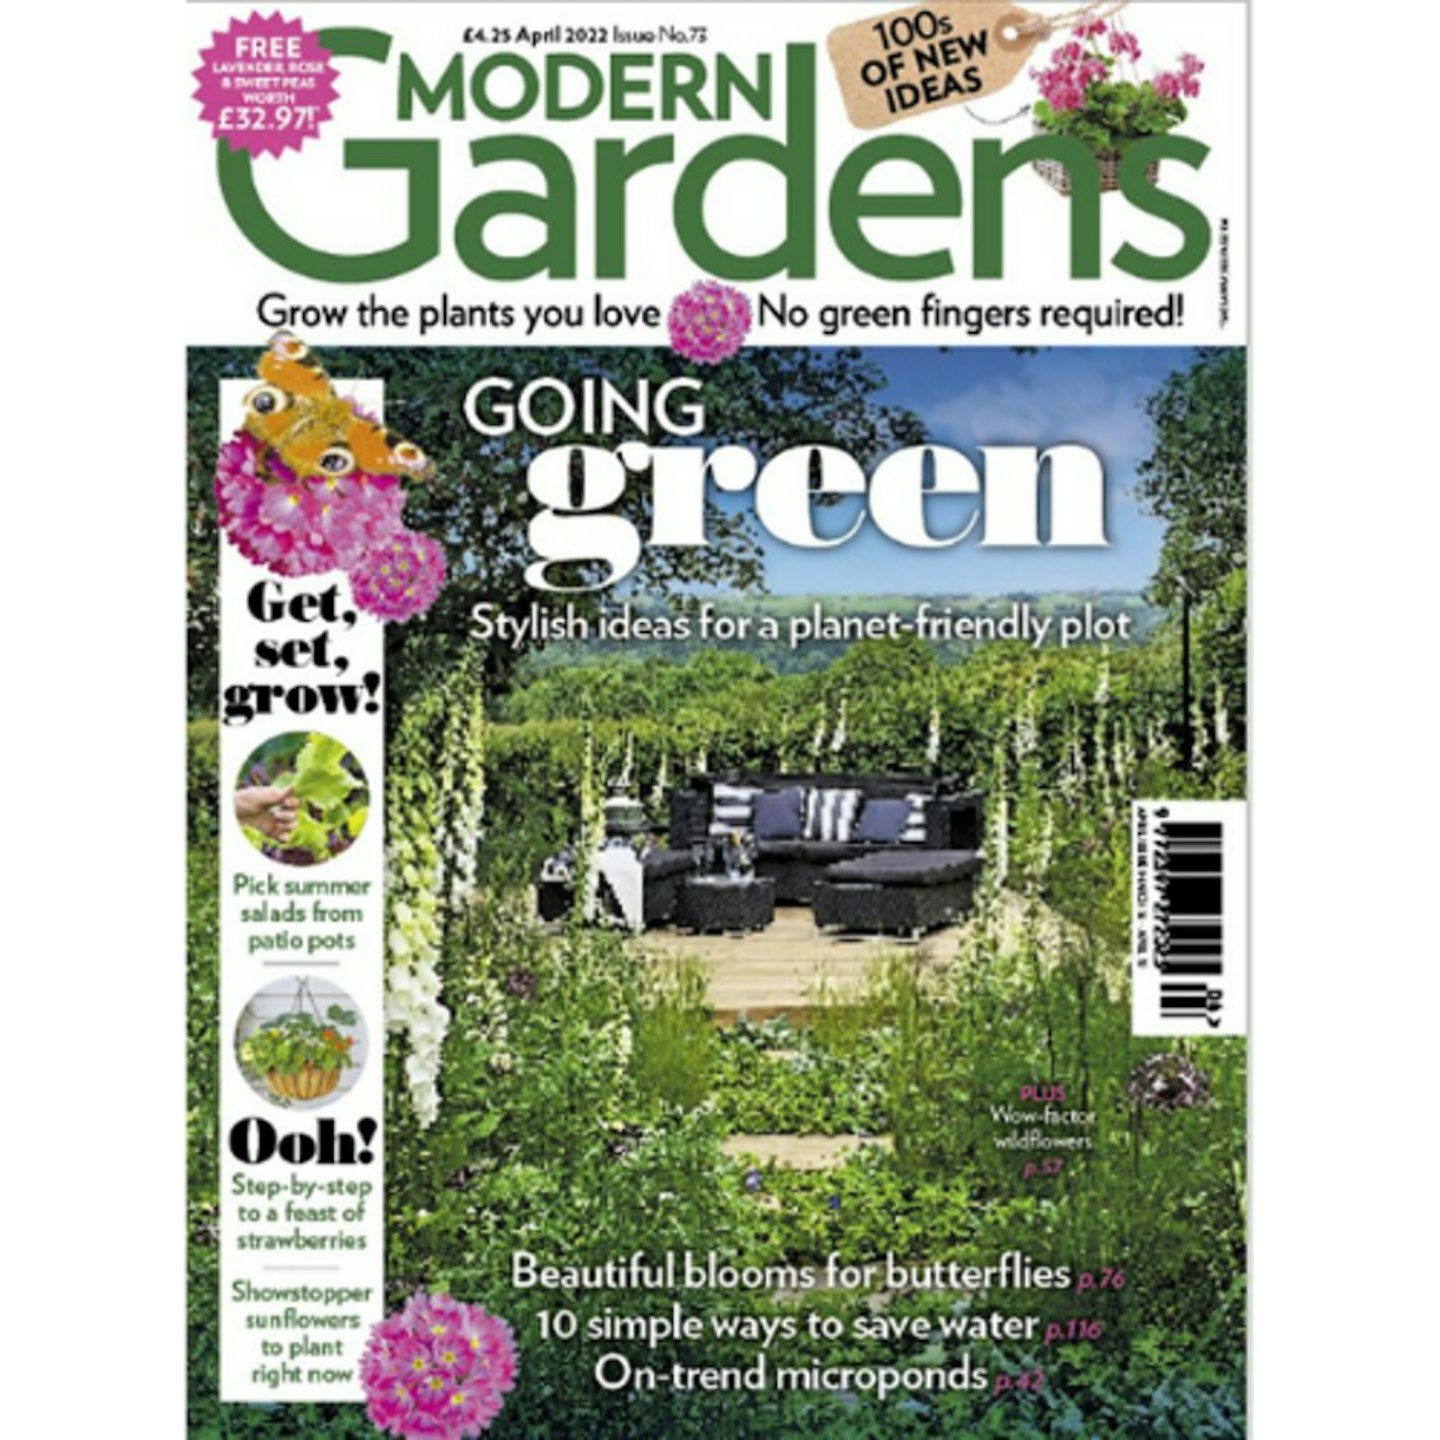 Relax with a subscription to Modern Gardens magazine